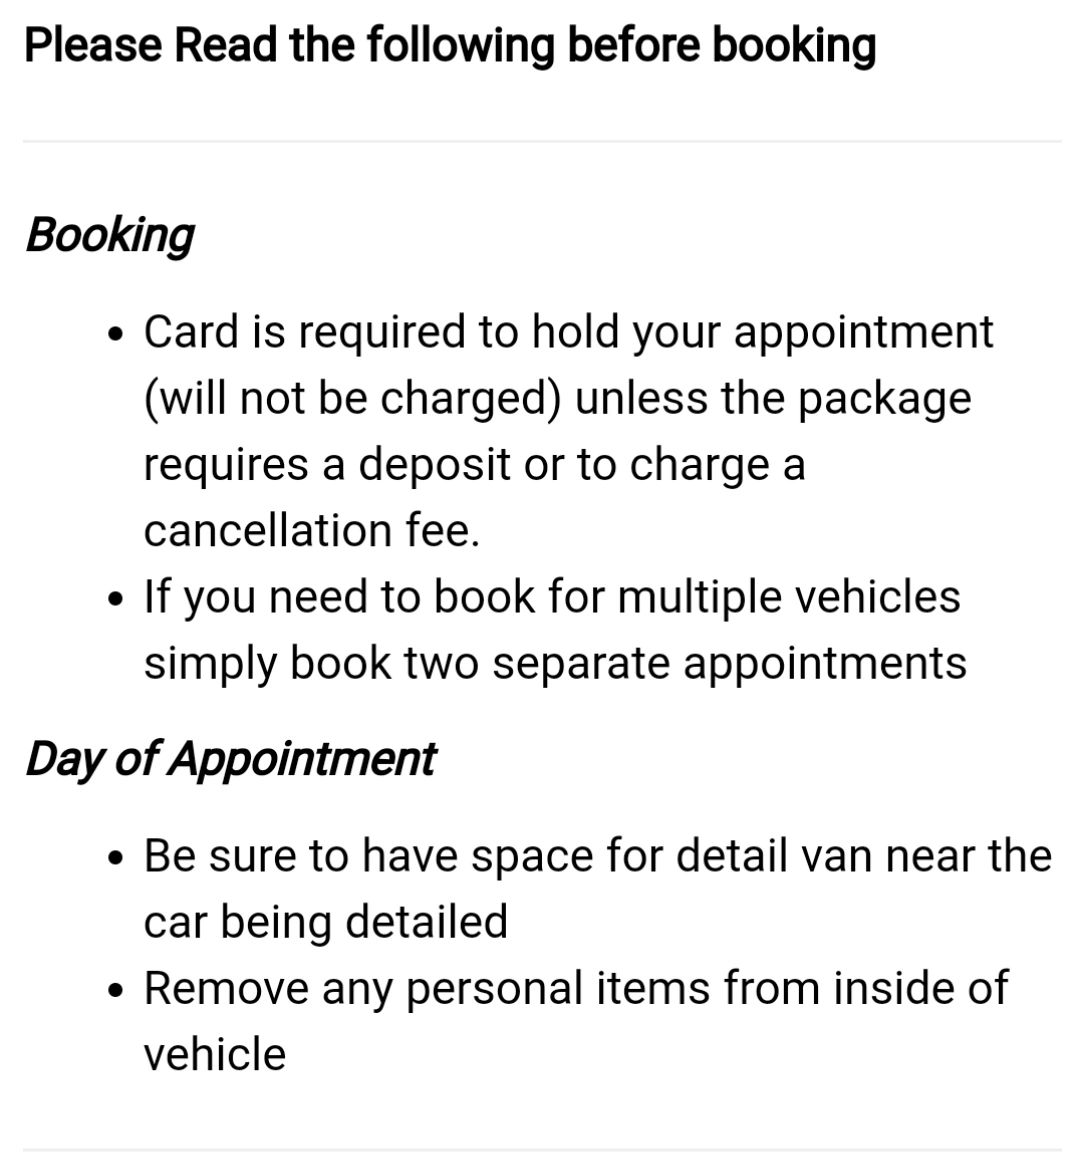 Please read before booking your Appointment